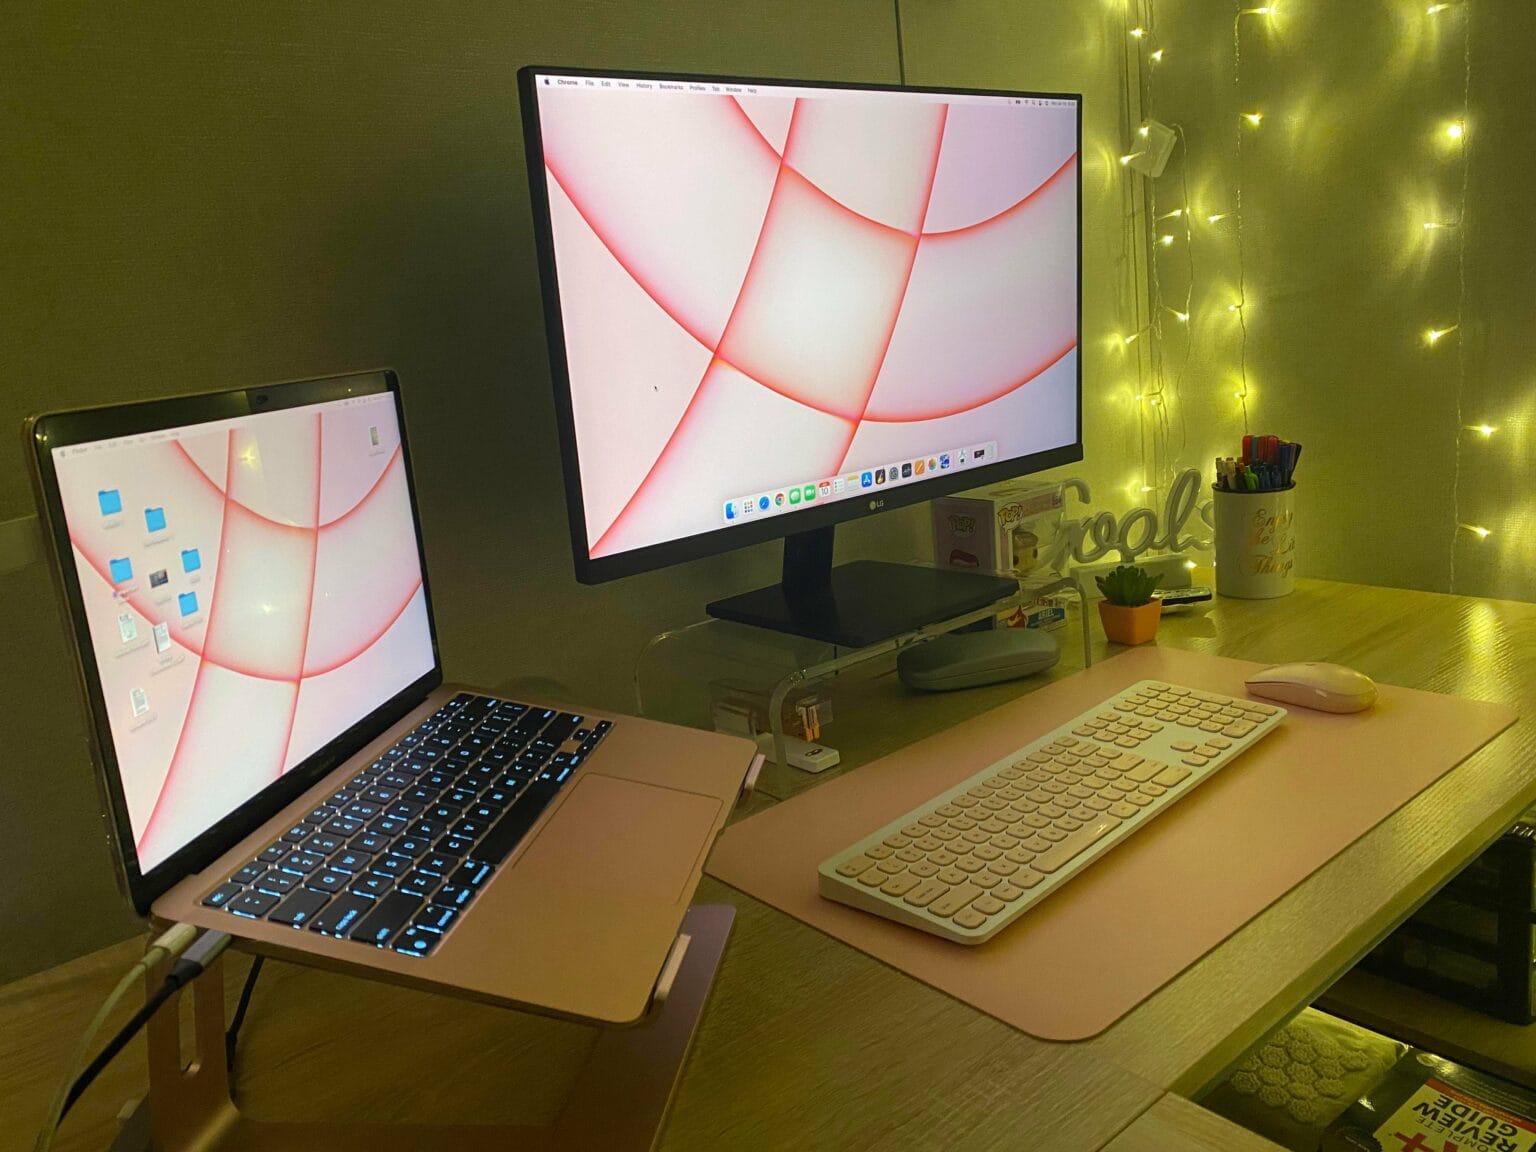 You don't have to spend a lot to have a highly functional and attractive computer setup.